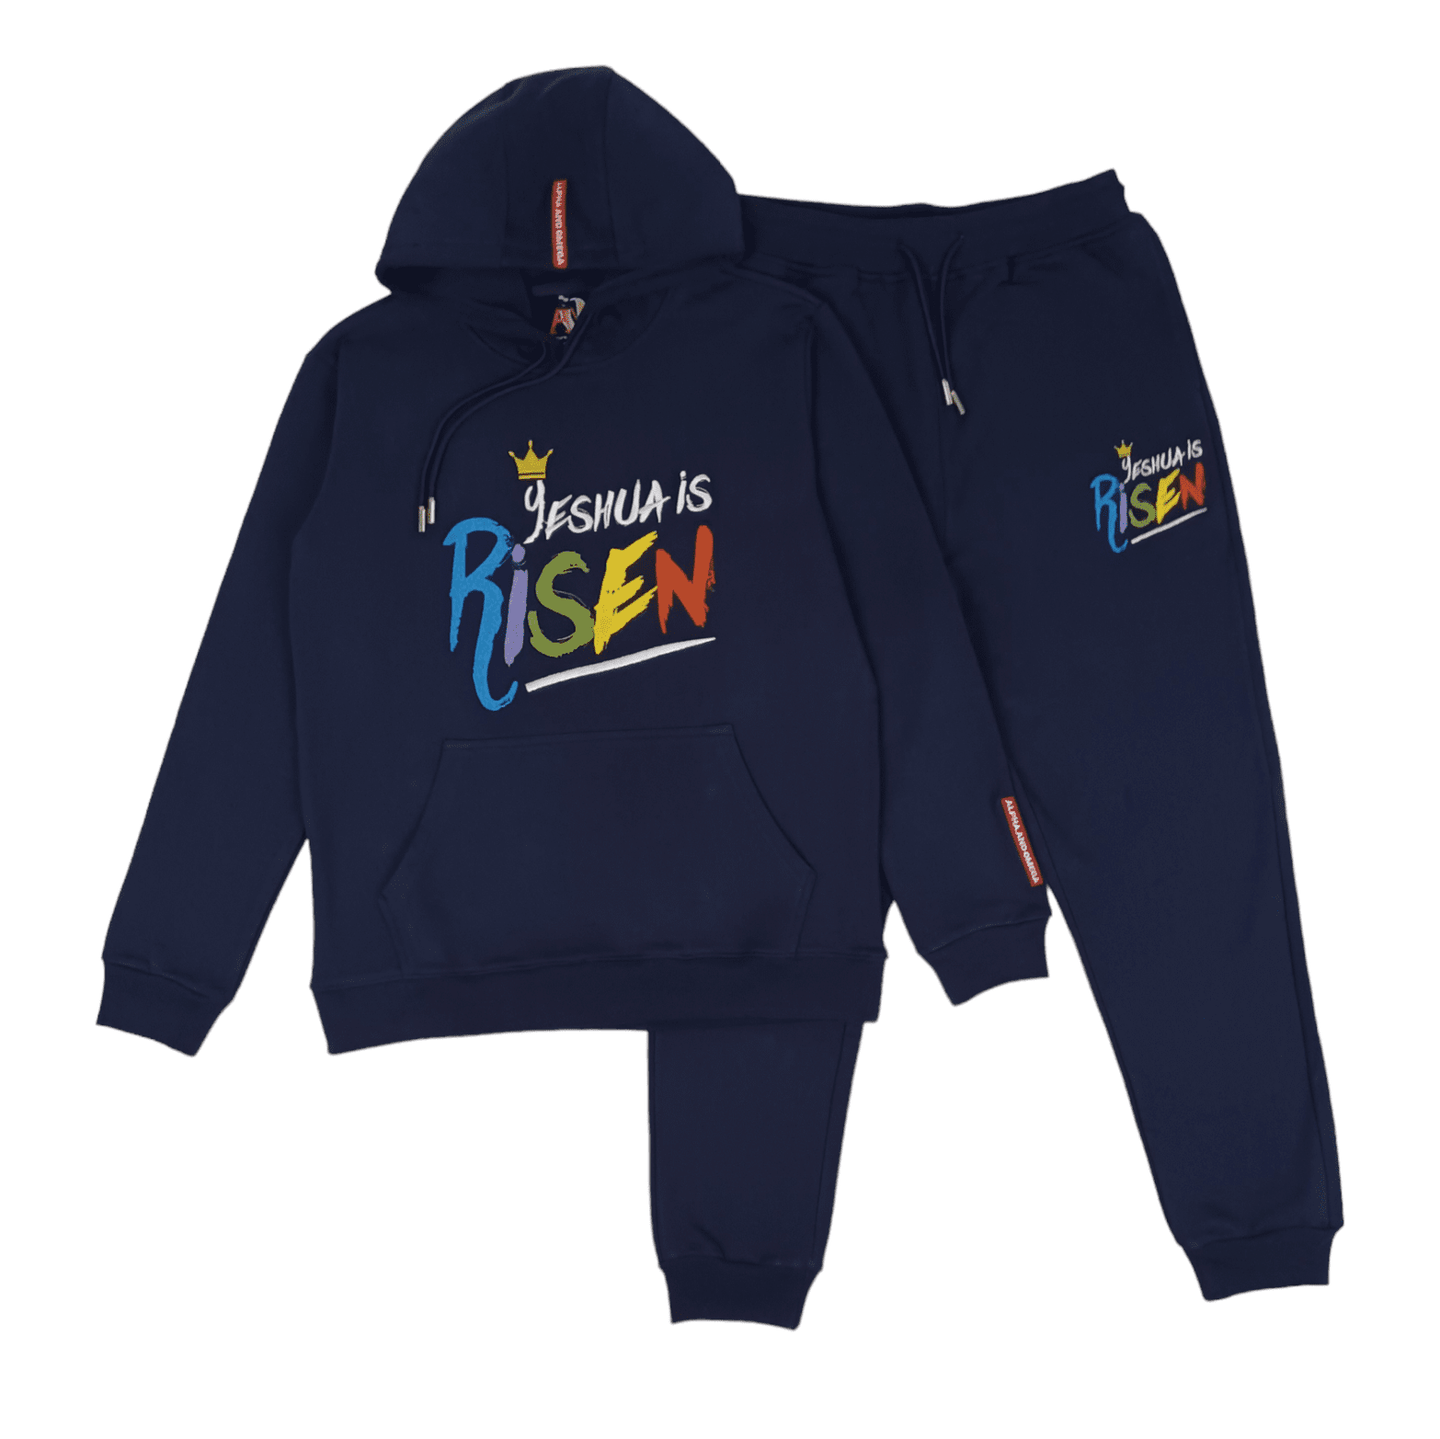 YESUA IS RISEN Embroidered Hoodie + Jogger pants Set (Navy)